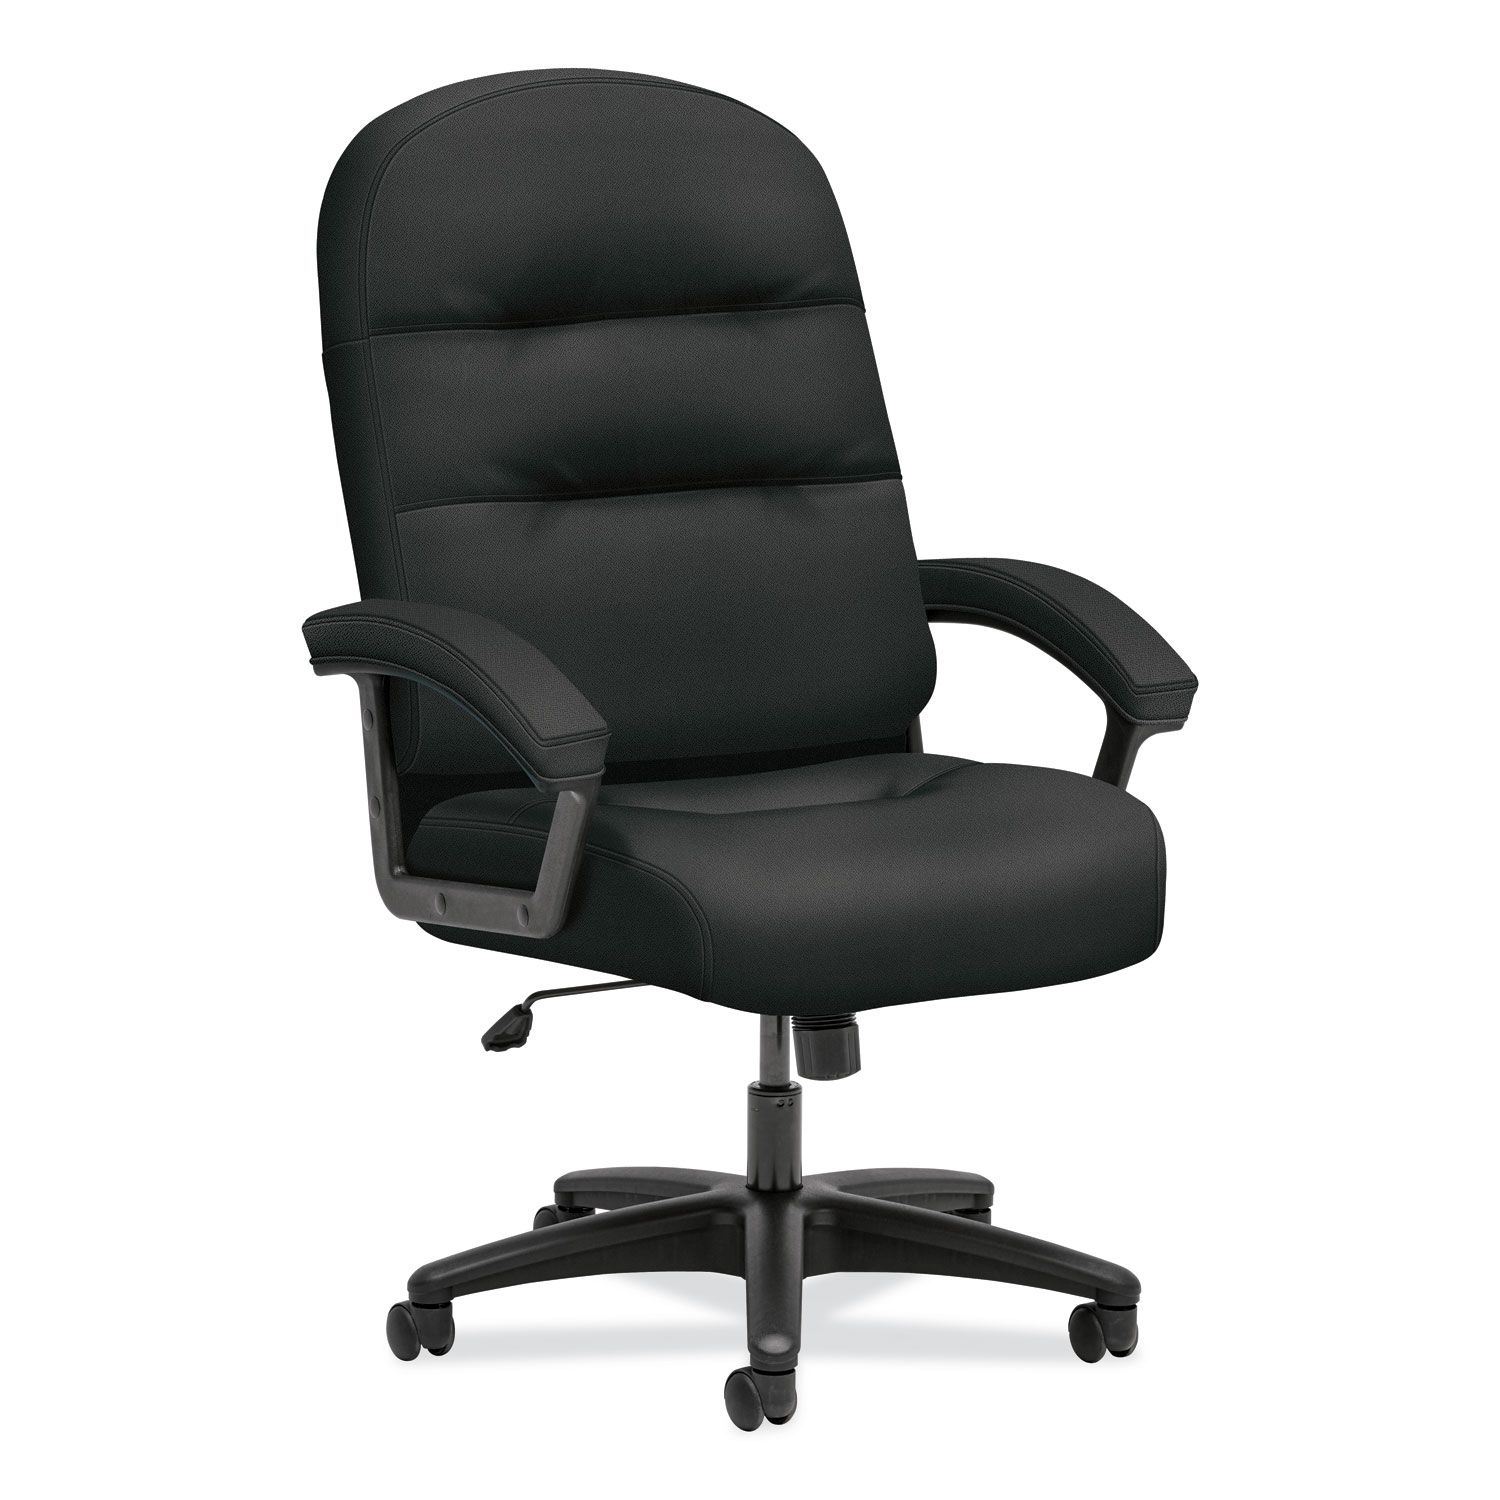  HON H2095.H.PWST10.T Pillow-Soft 2090 Series Executive High-Back Swivel/Tilt Chair, Supports up to 300 lbs., Black Seat/Black Back, Black Base (HON2095HPWST10T) 